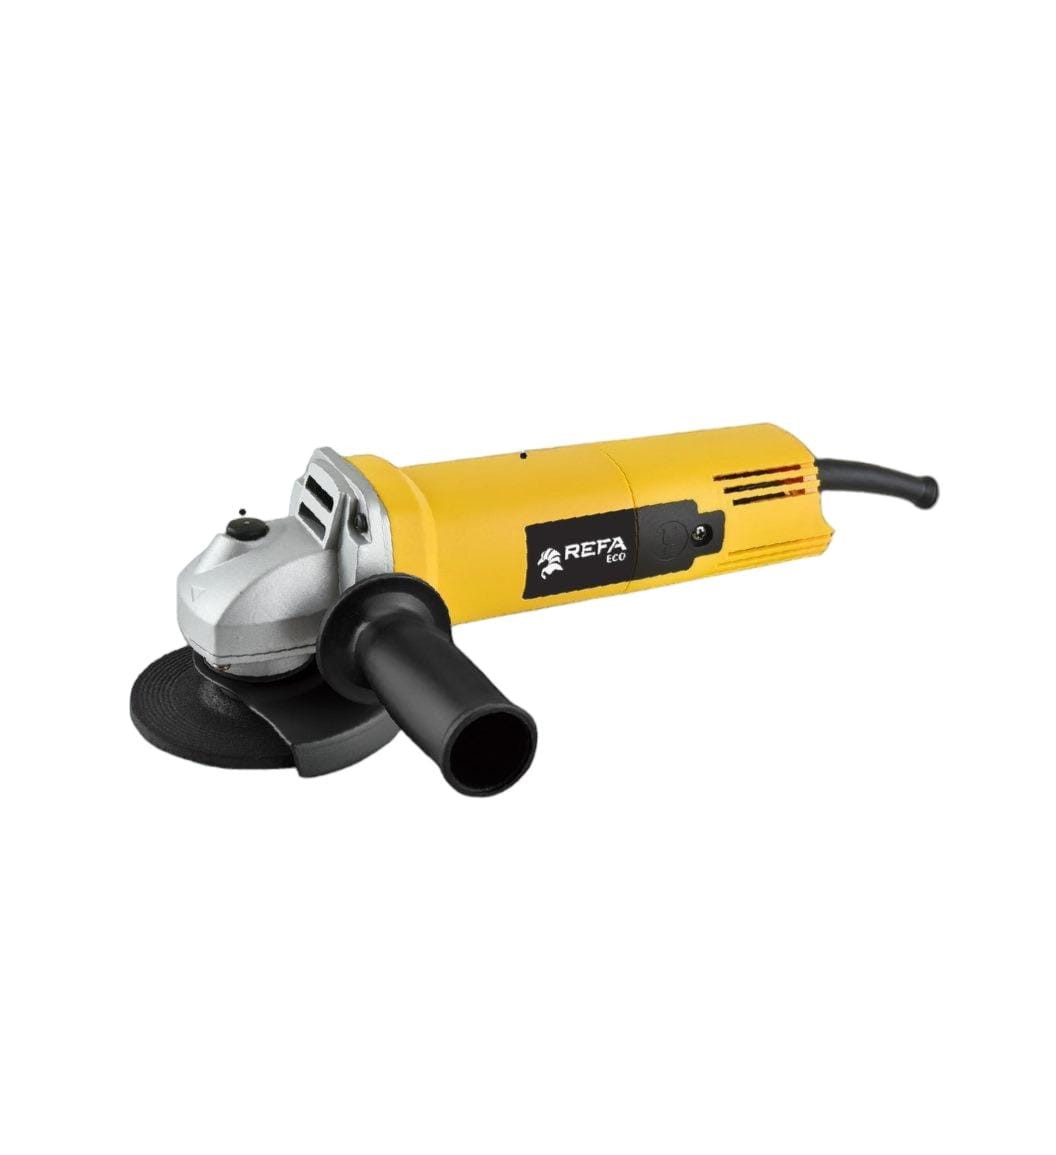 Refa 100mm Angle Grinder 950W with 100% Copper Winding for Long Life